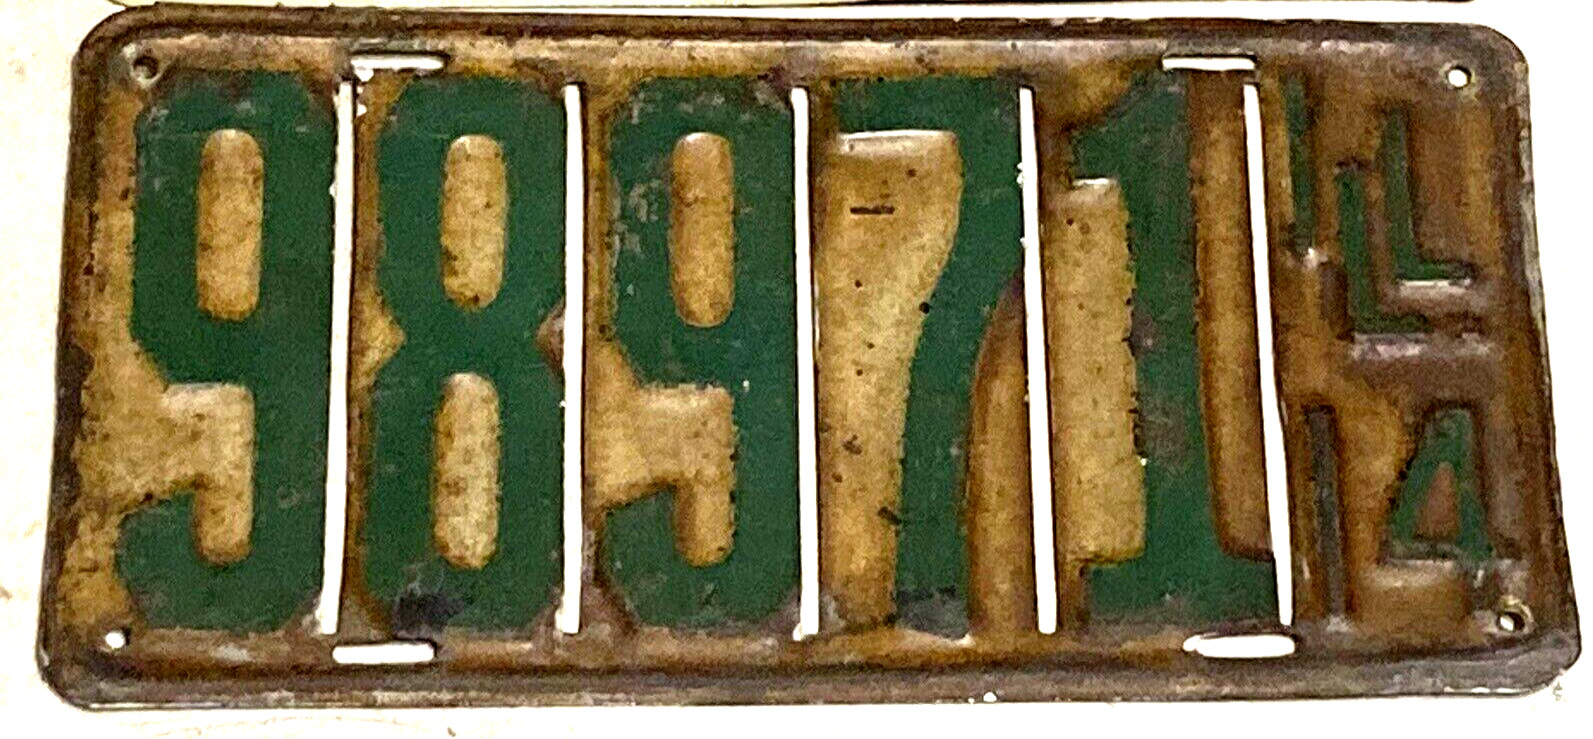 HUGE 1914 Illinois FRONT license plate SLOTTED radiator vent 98971 IL Model A T